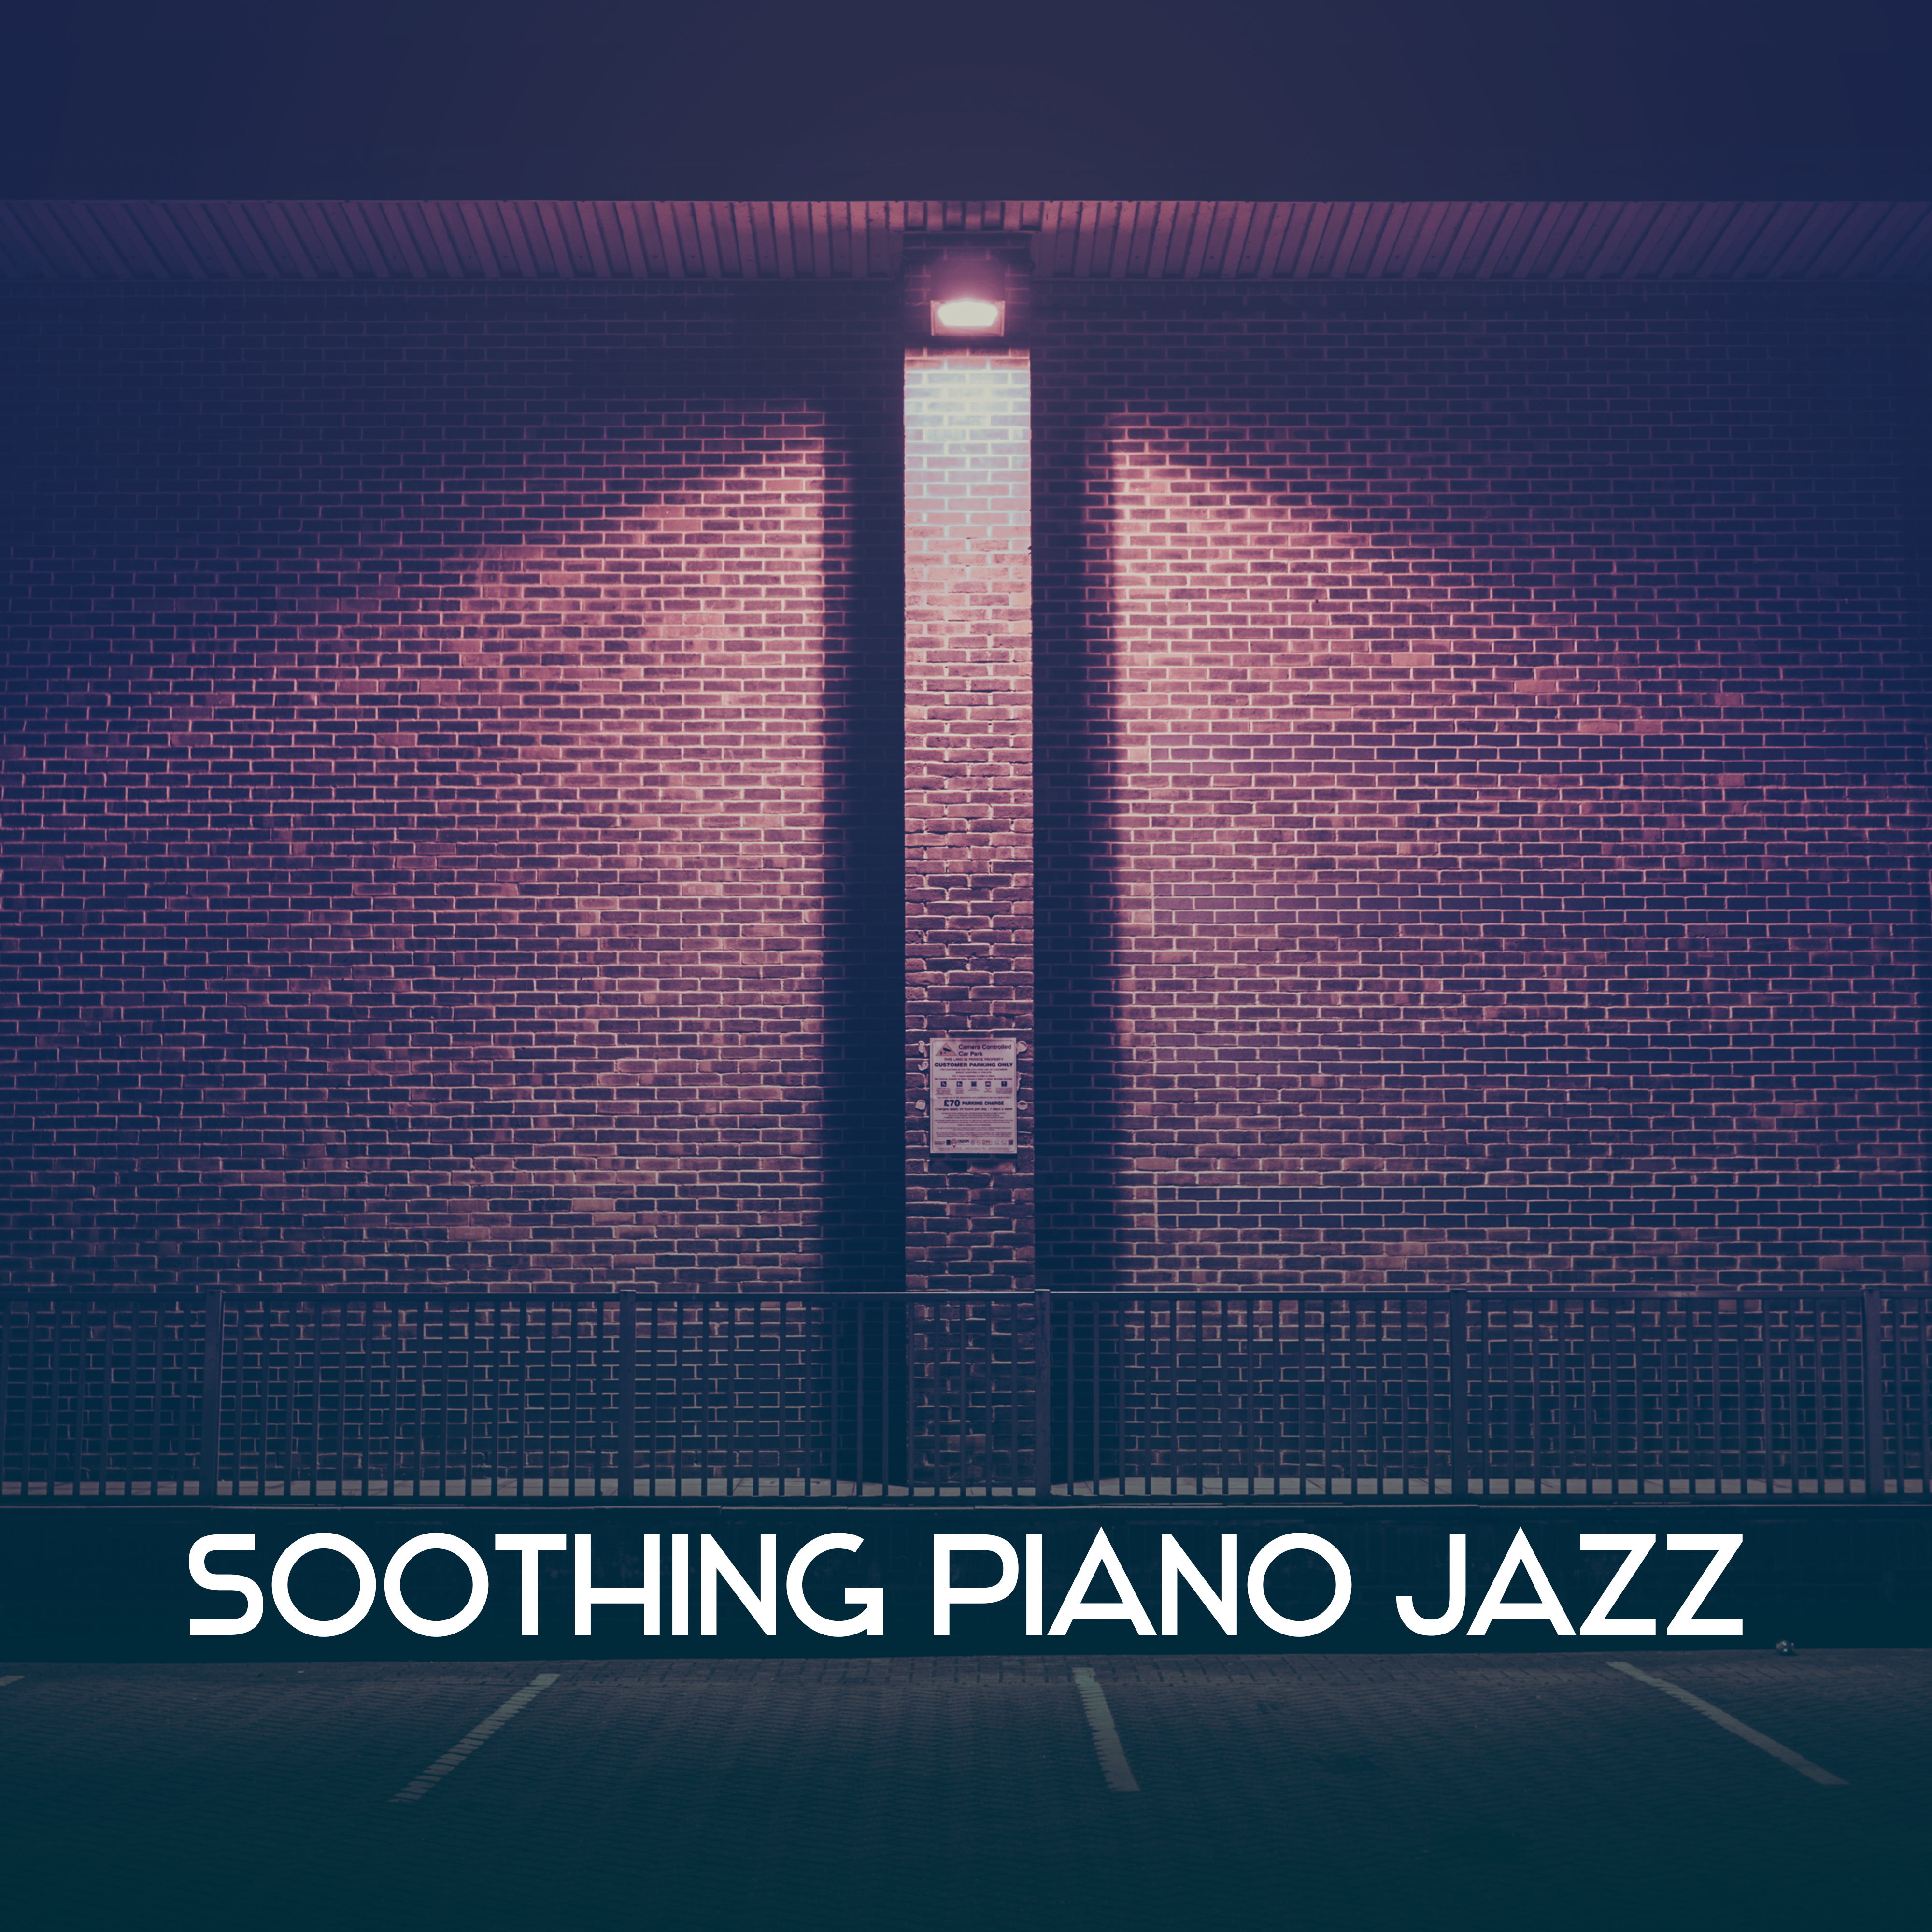 Soothing Piano Jazz  Calming Jazz Sounds, Smooth Music, Jazz for Sweet Dreams, Rest  Relax